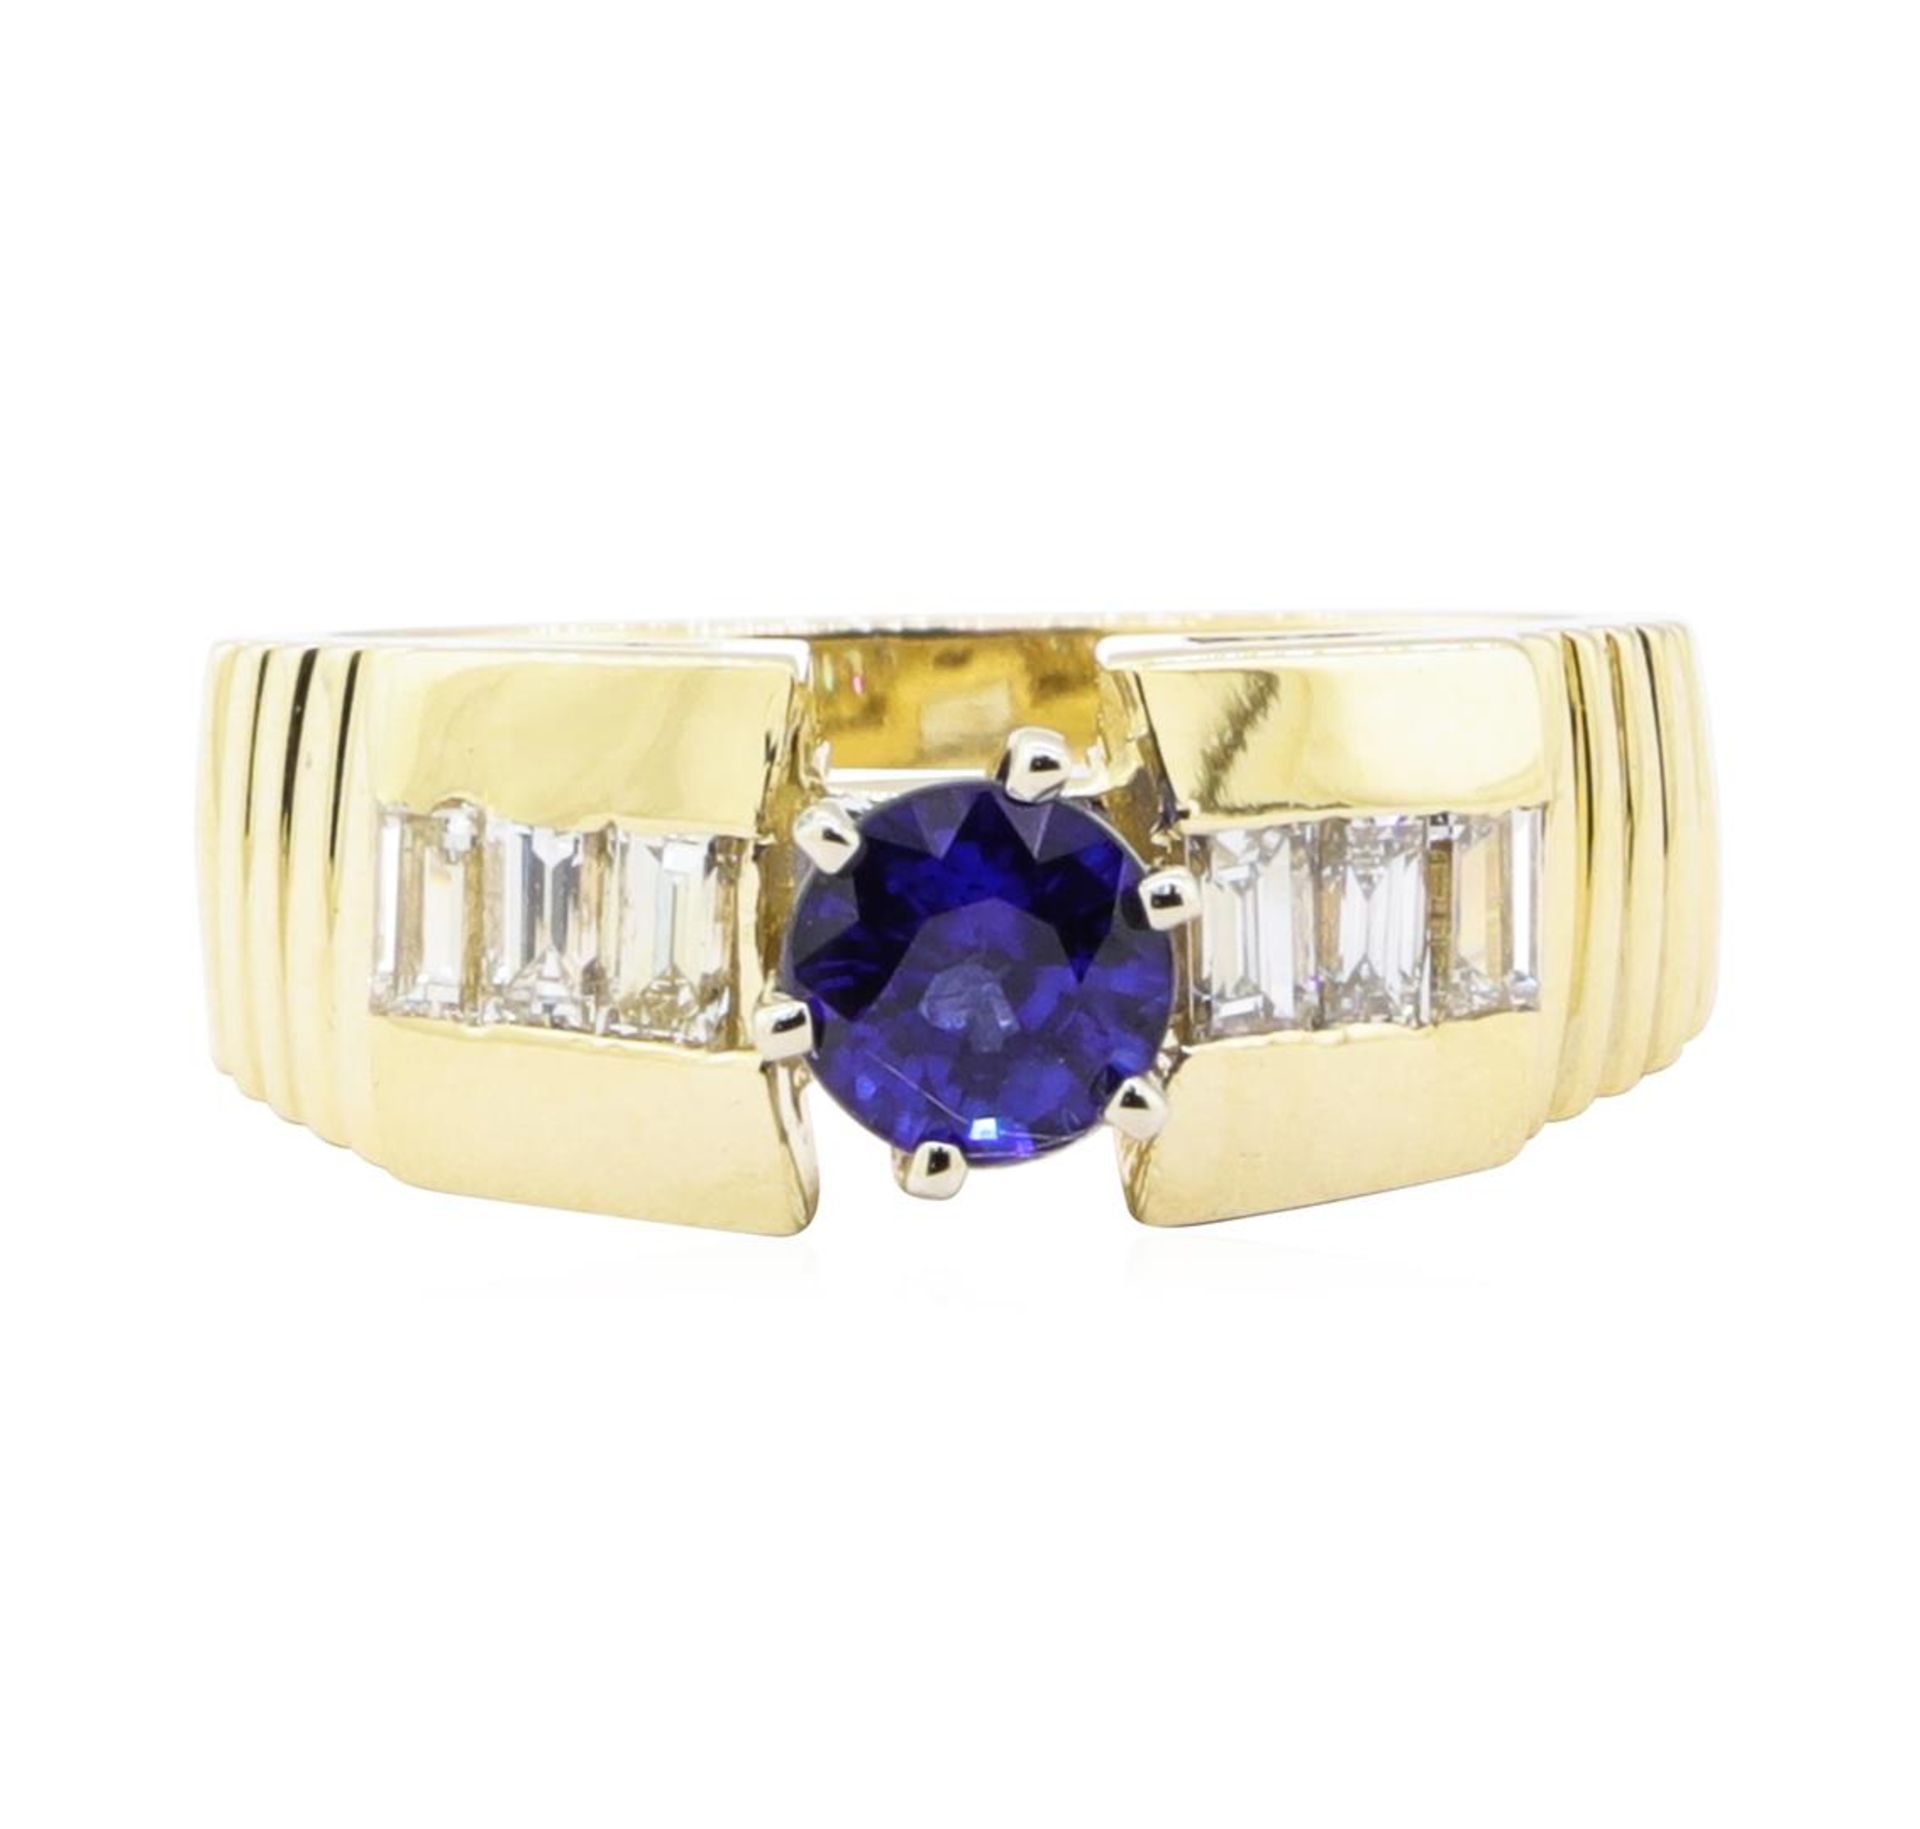 1.30 ctw Sapphire and Diamond Ring - 14KT Yellow Gold - Image 2 of 4